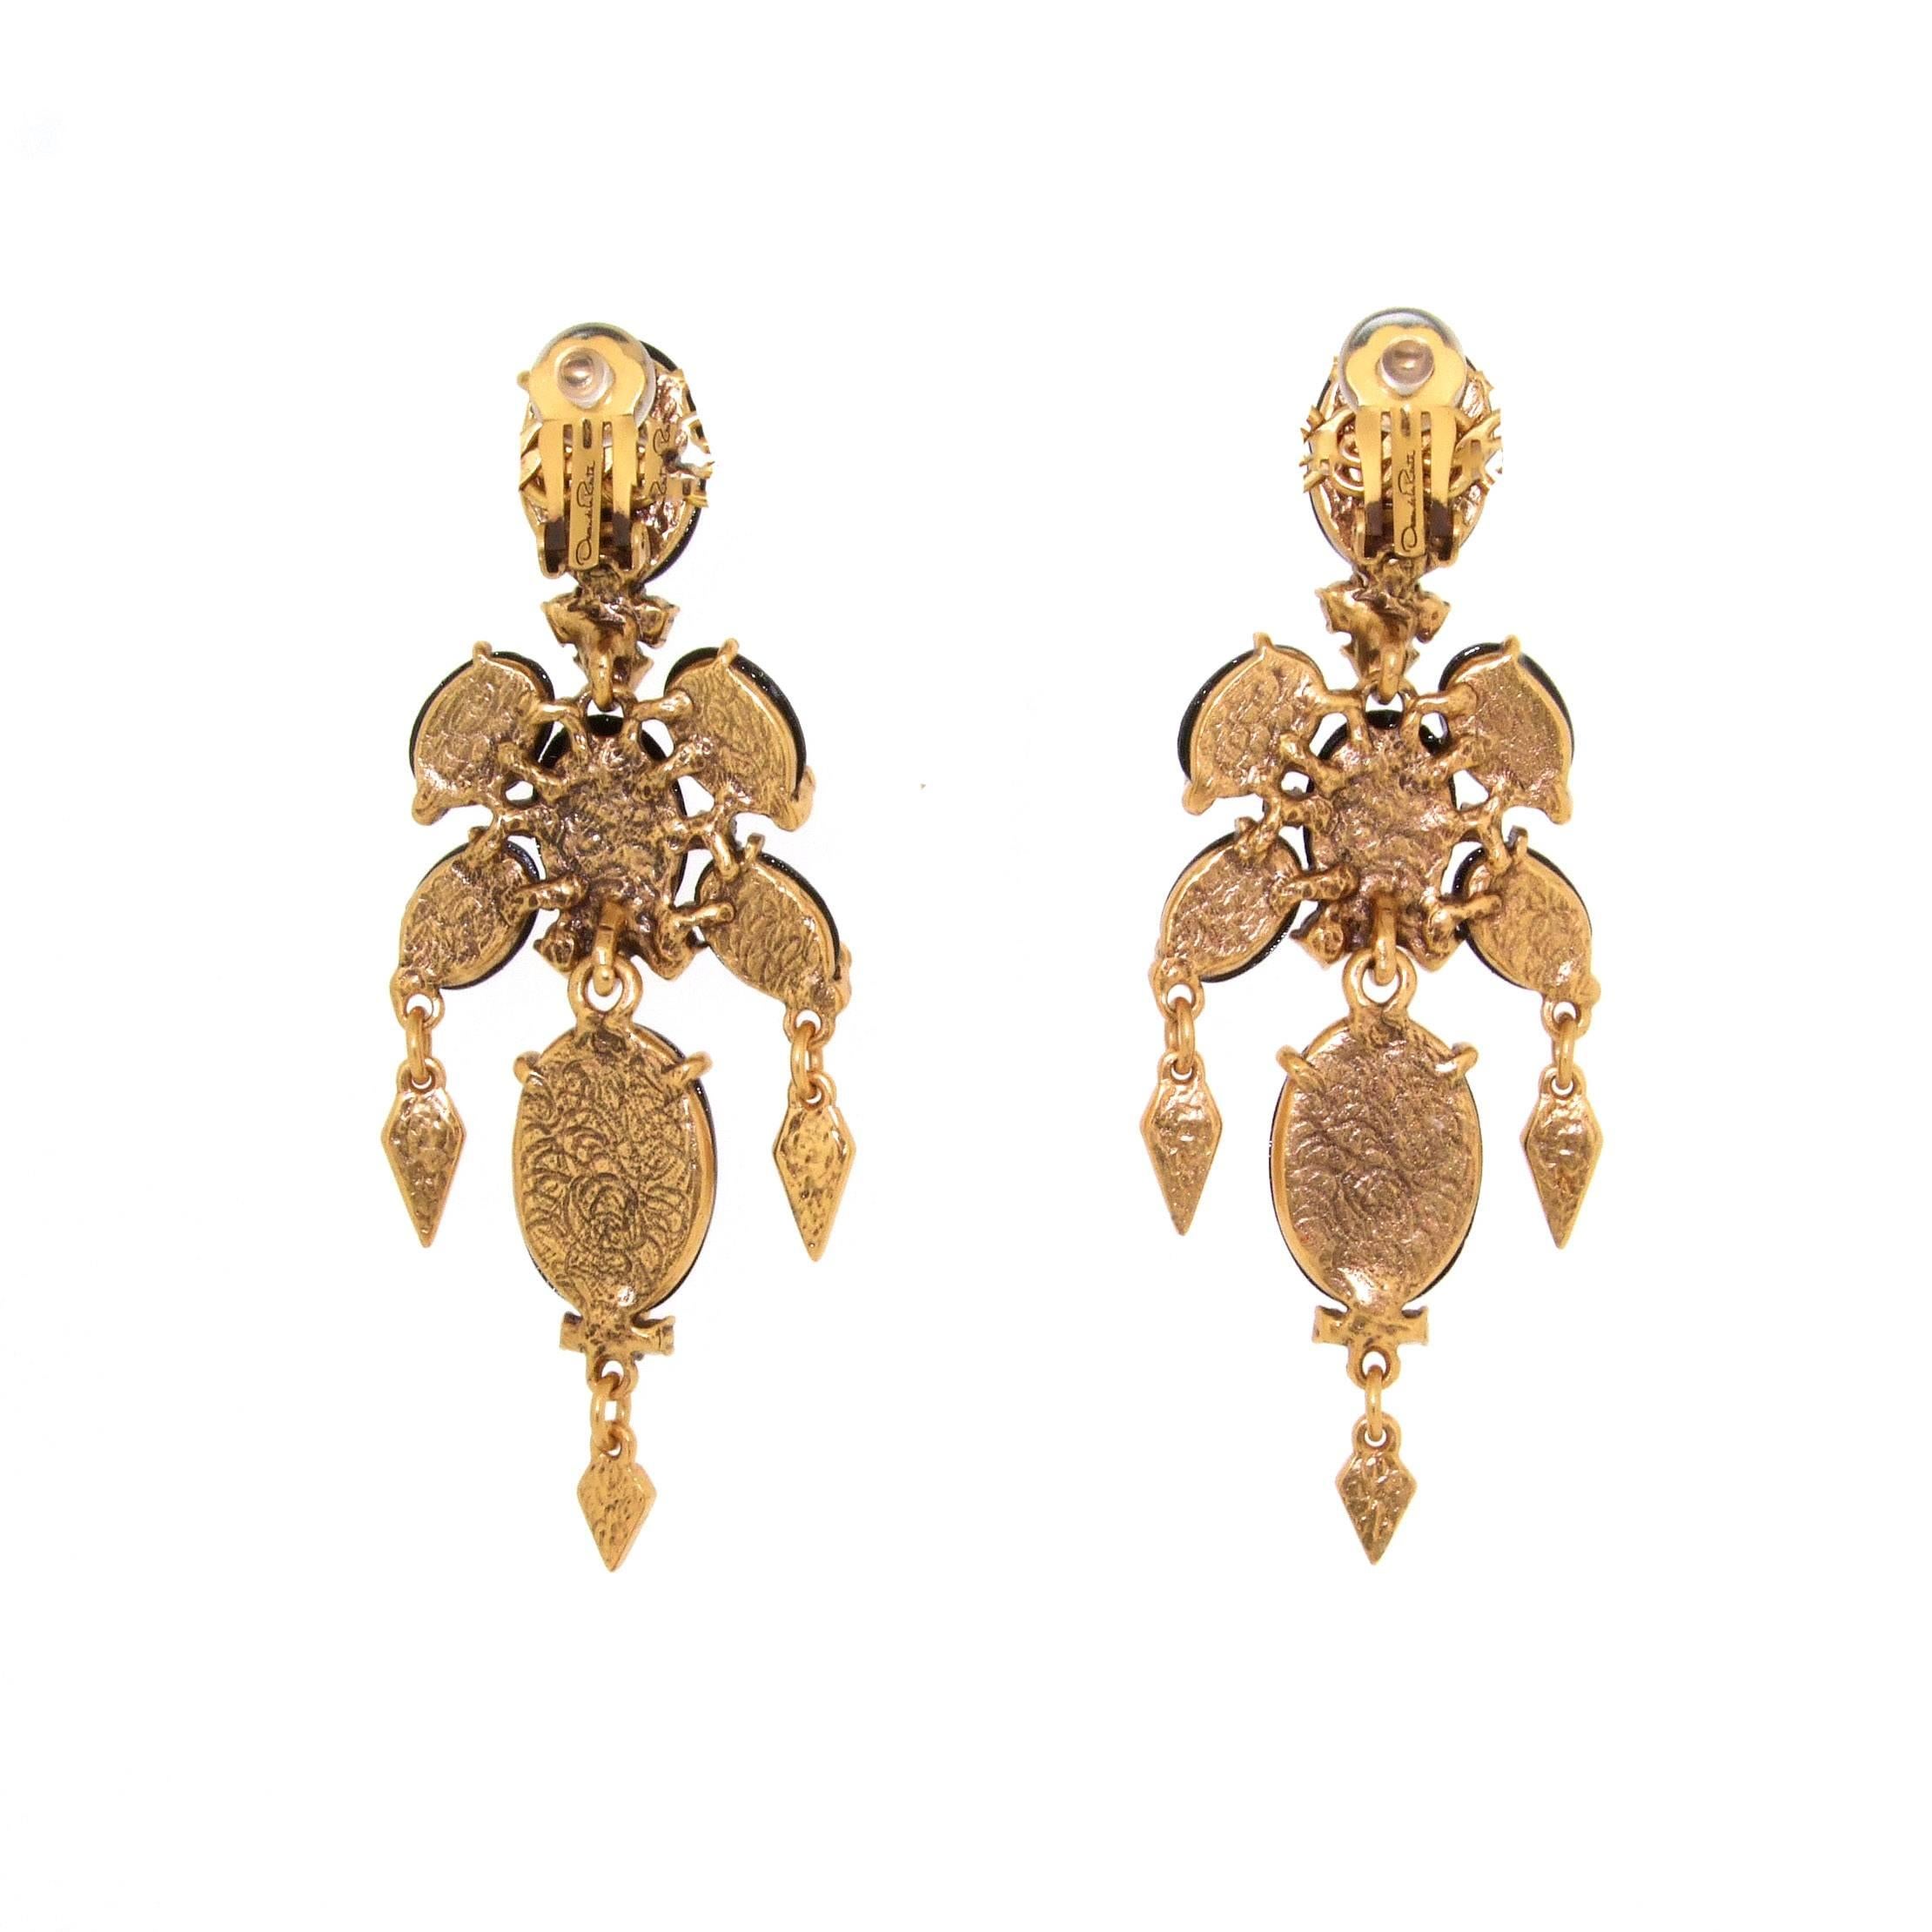 A air of chandelier clip on earrings by Oscar De La Renta. Black acrylic stones and clear crystals set in bronzed costume metal.

They measure 10cm drop by 3.5cm at the widest point, 1.5cm wide at the top.